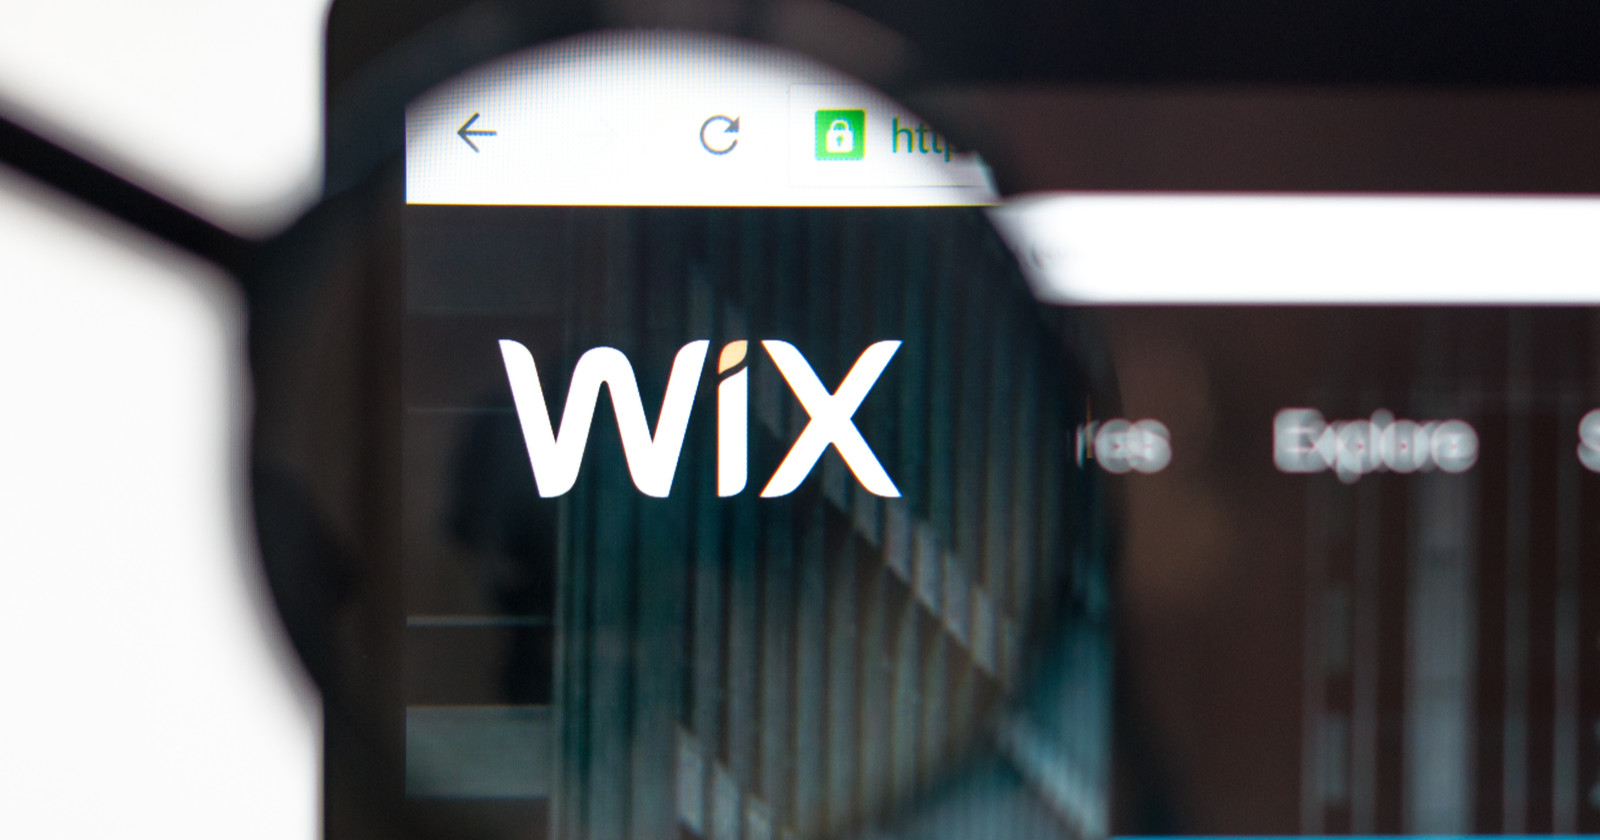 Wix logo in a magnifying glass